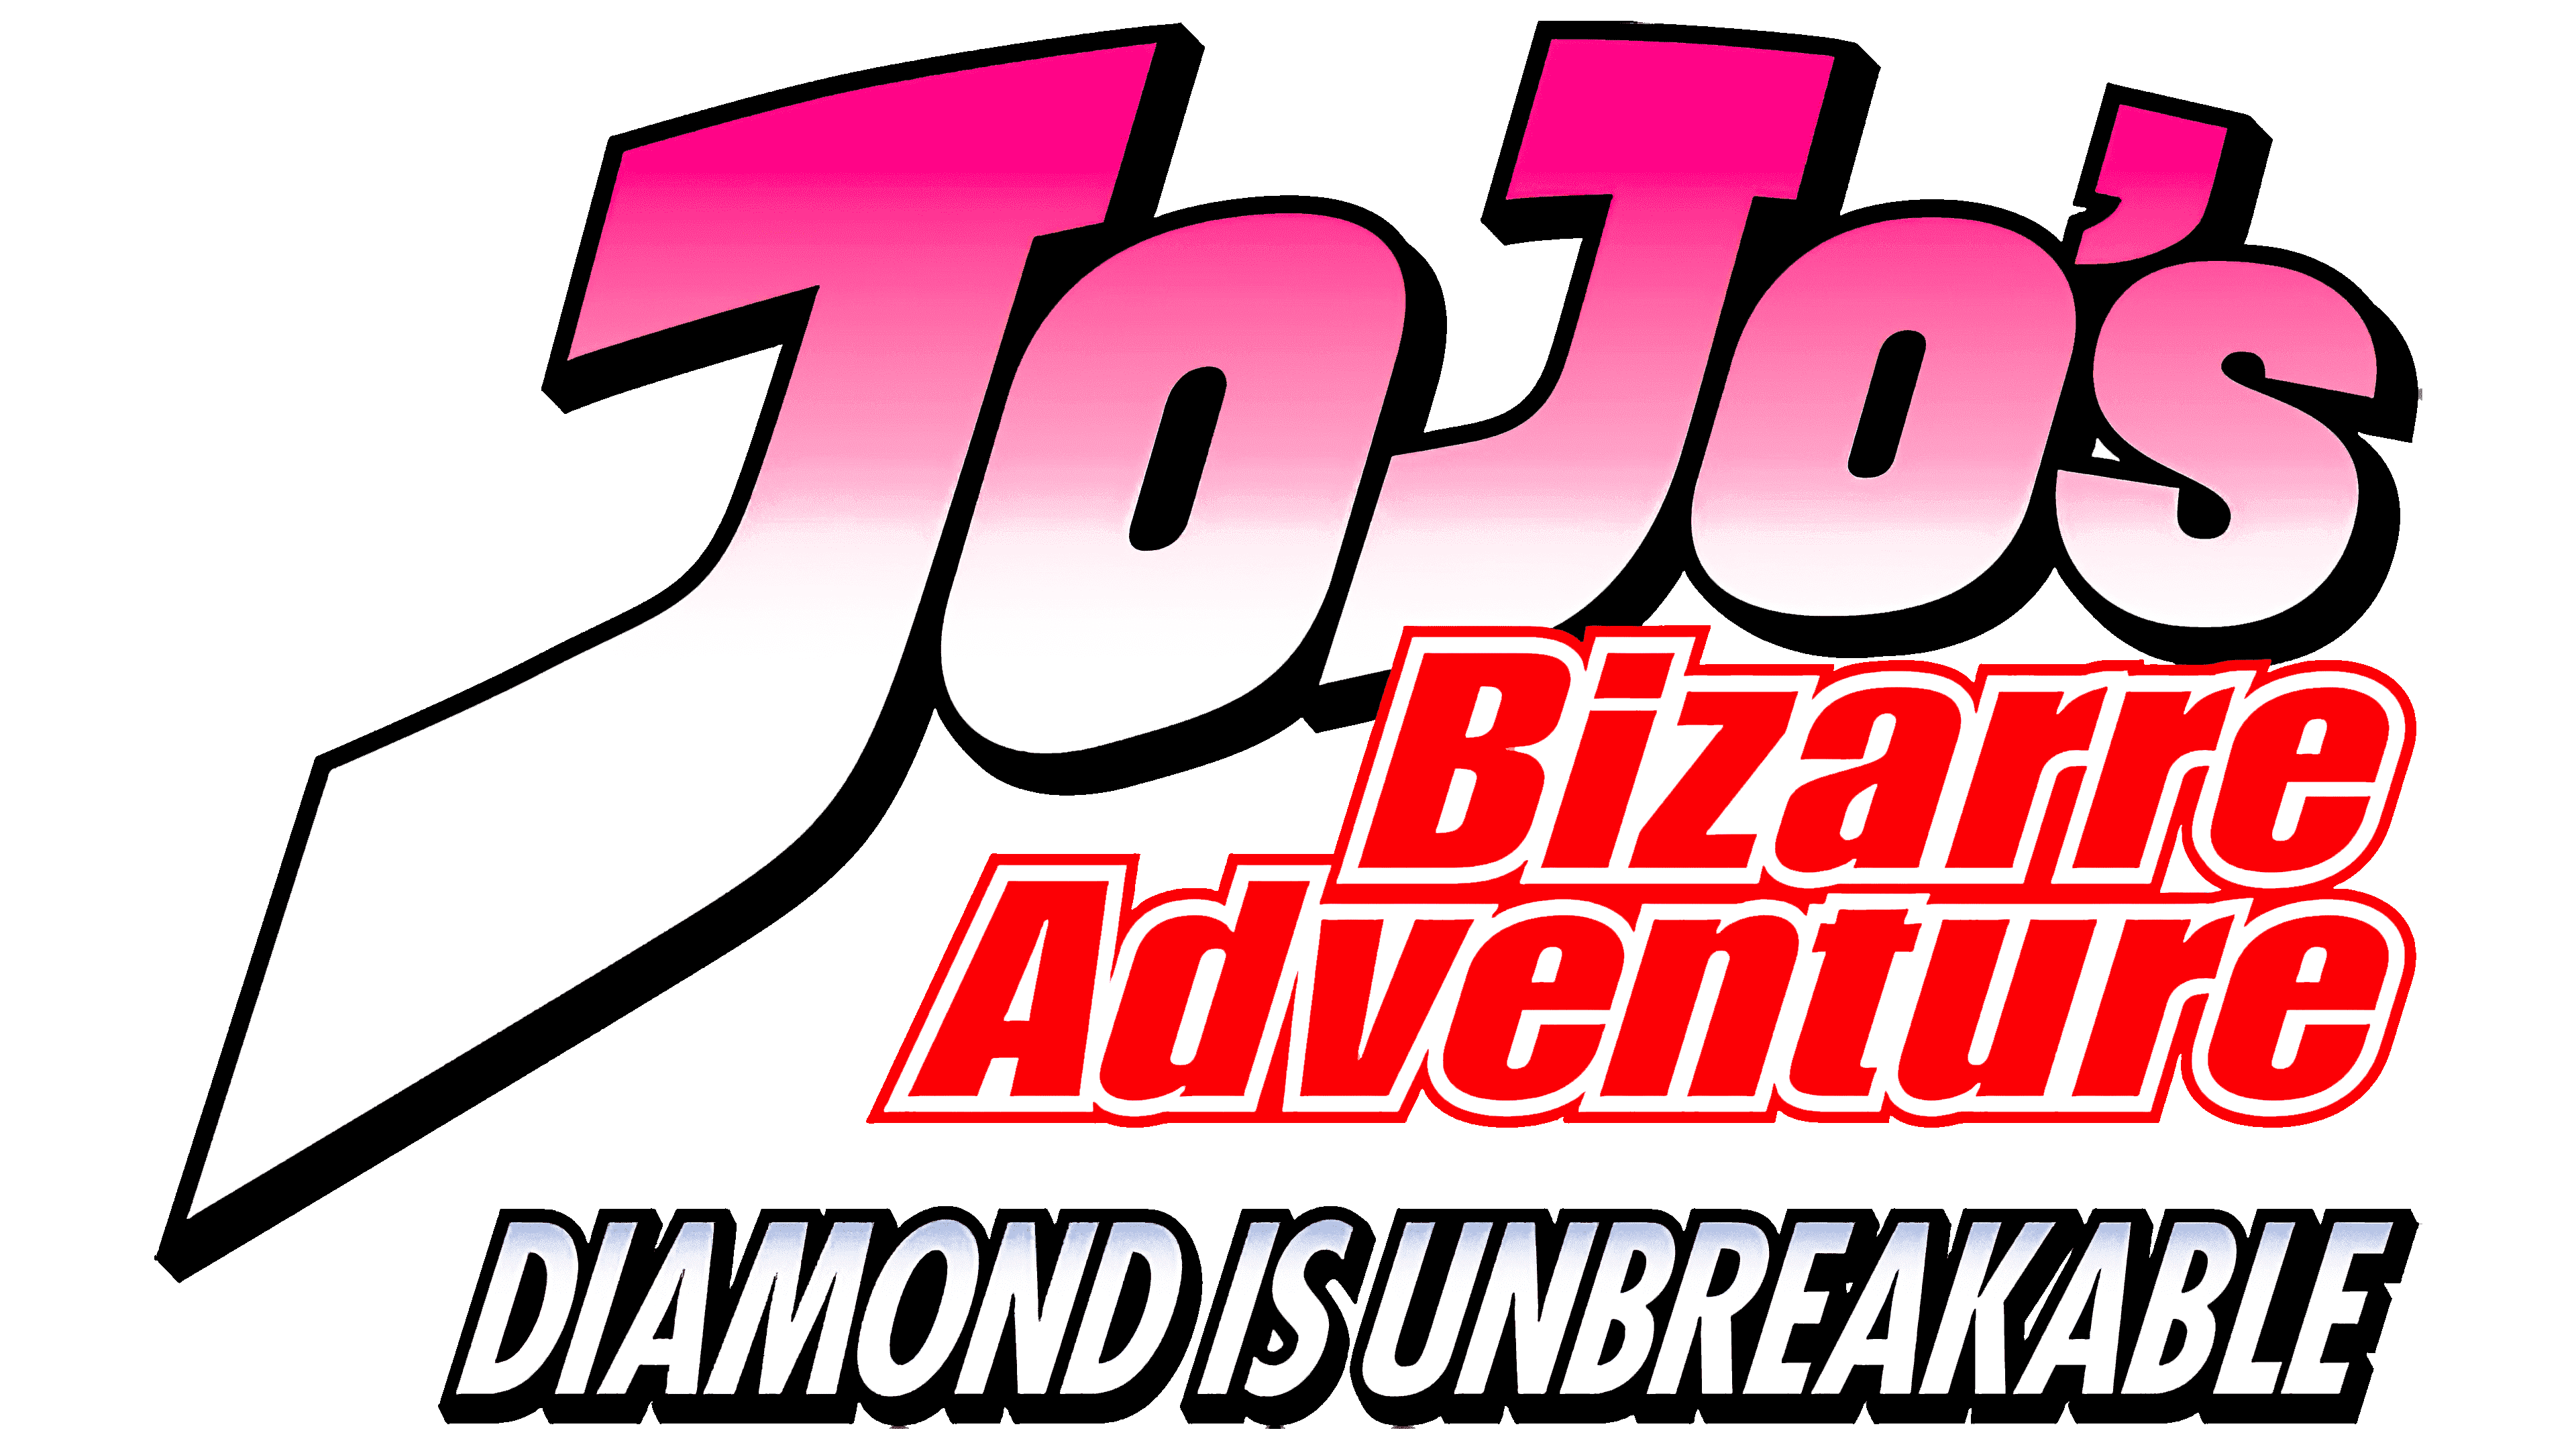 A Black Background With White Text And Pink Letters